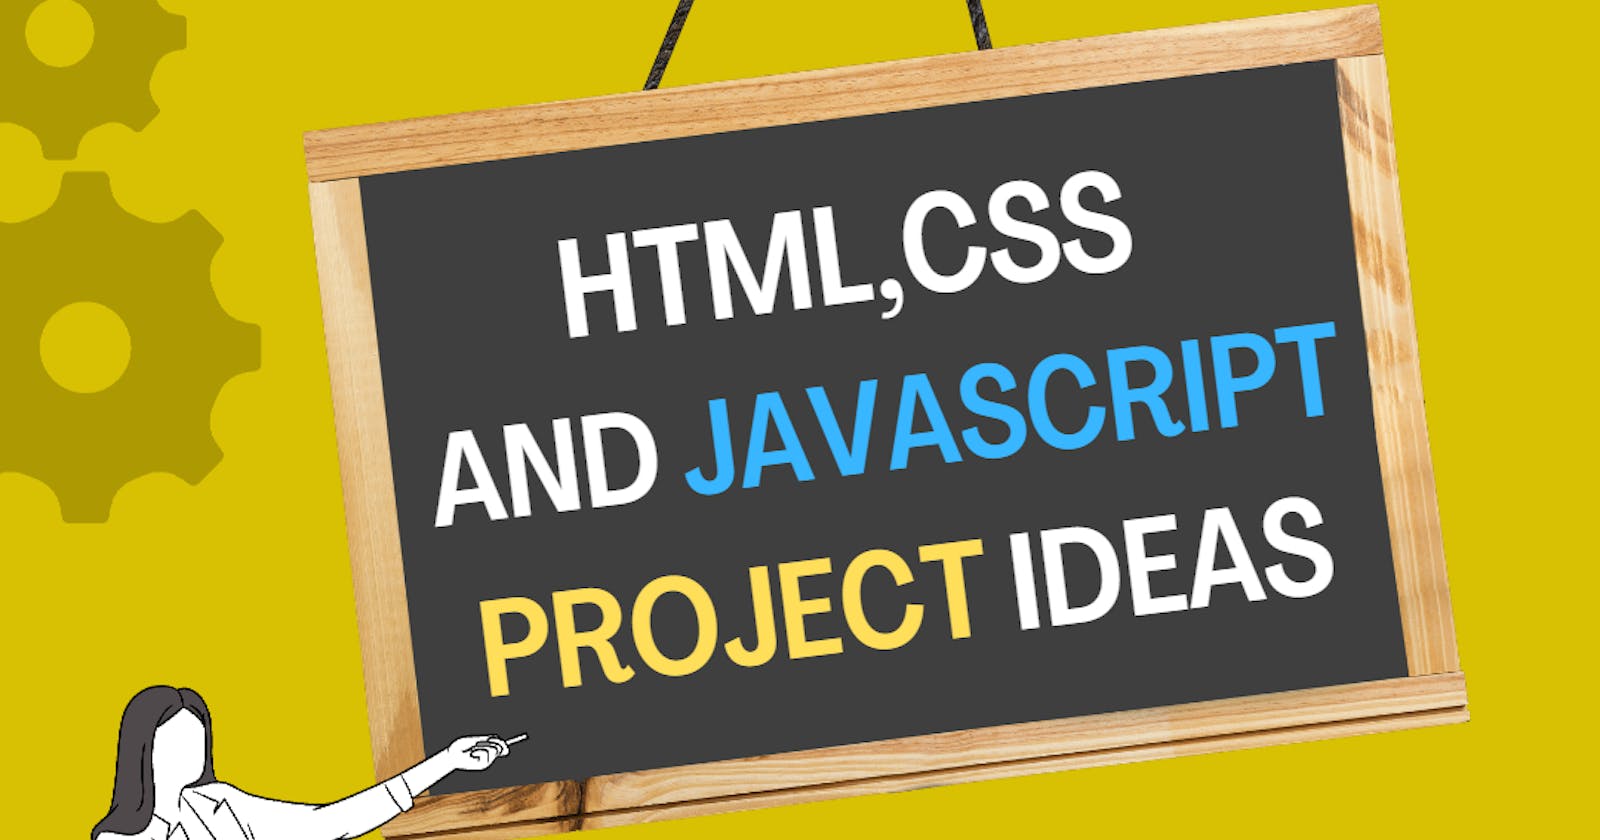 Awesome Project ideas for HTML, CSS and Javascript!